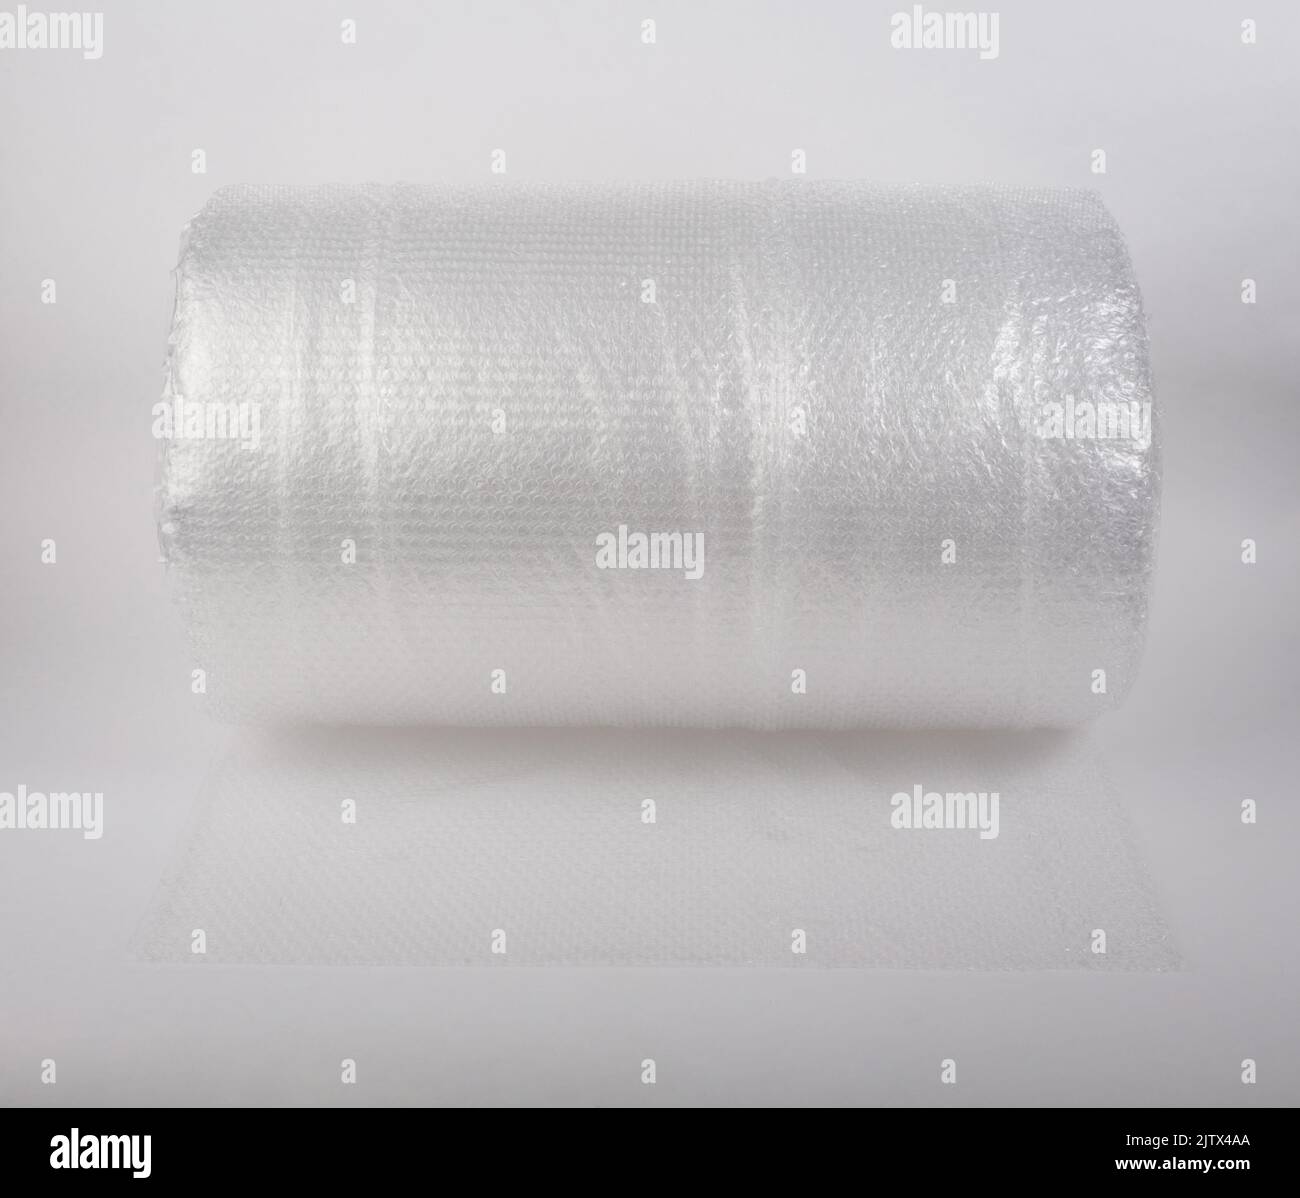 Roll of shockproof material Polyethylene foam Air bubble isolated on white background Stock Photo